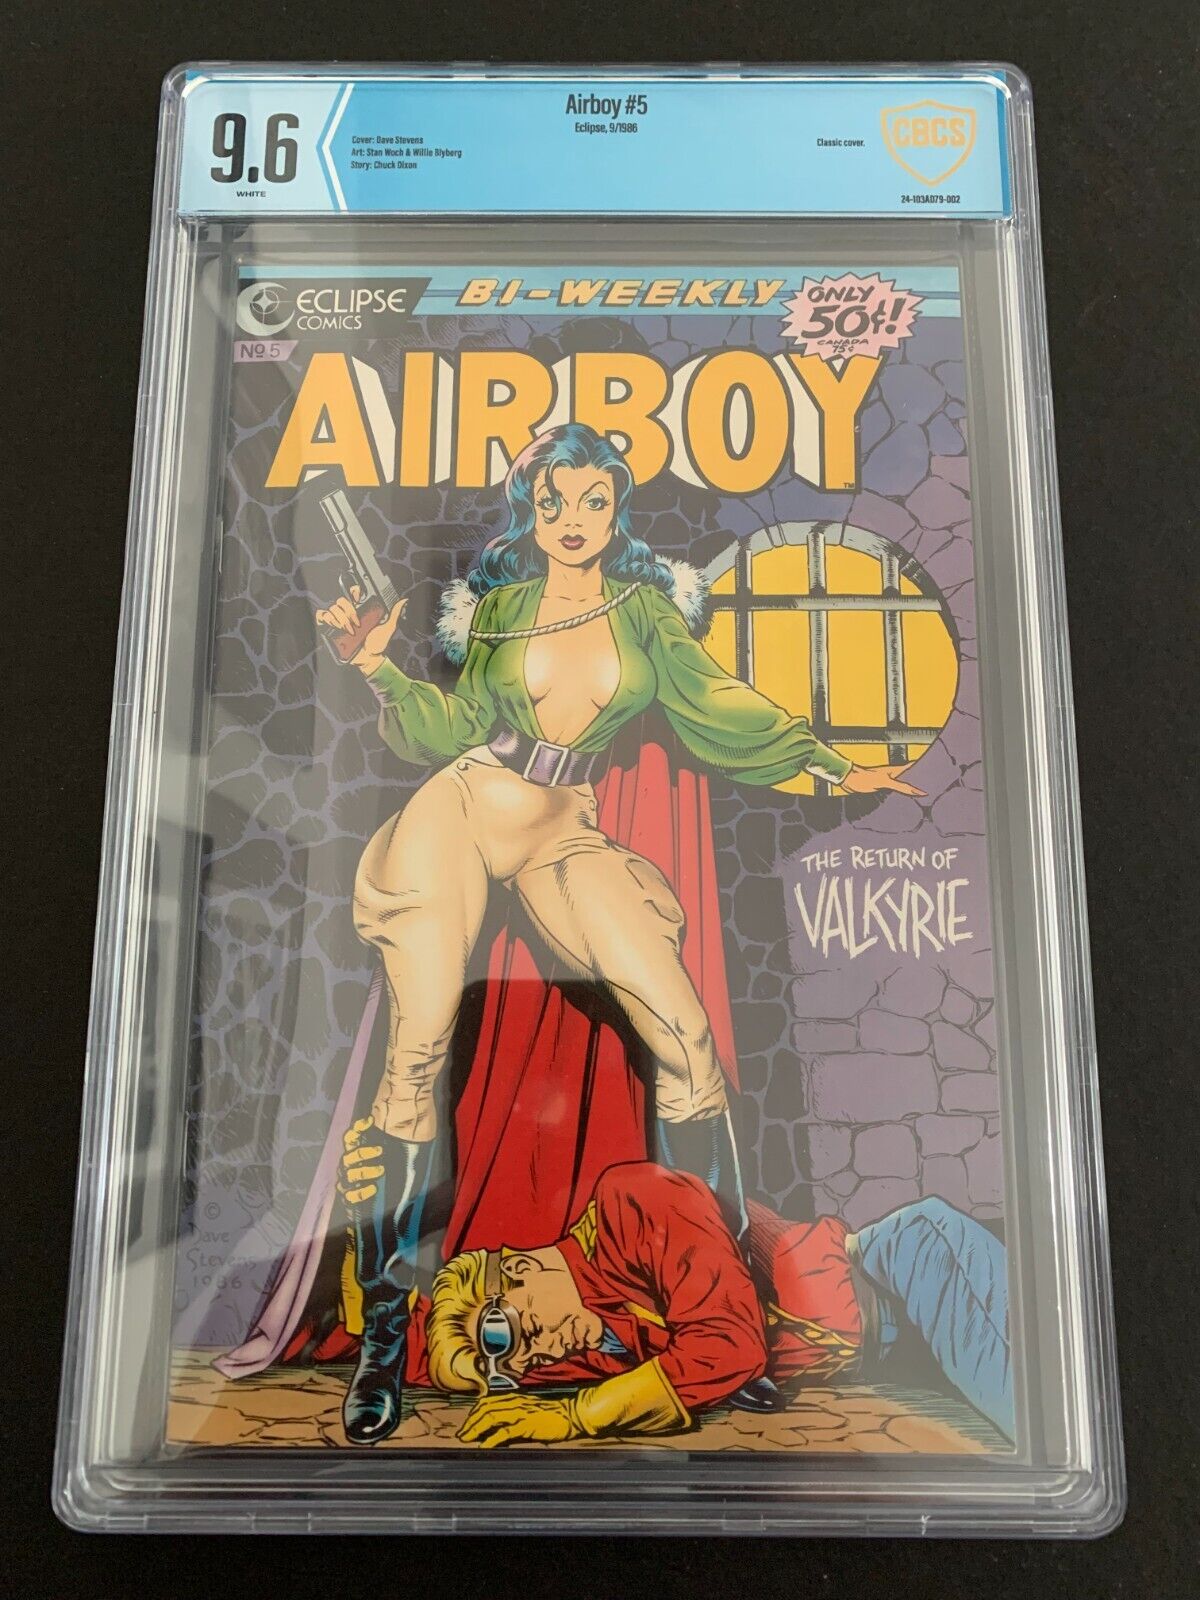 AIRBOY #5 * CBCS 9.6 * (ECLIPSE, 1986) DAVE STEVENS COVER  LIKE CGC  PRISTINE